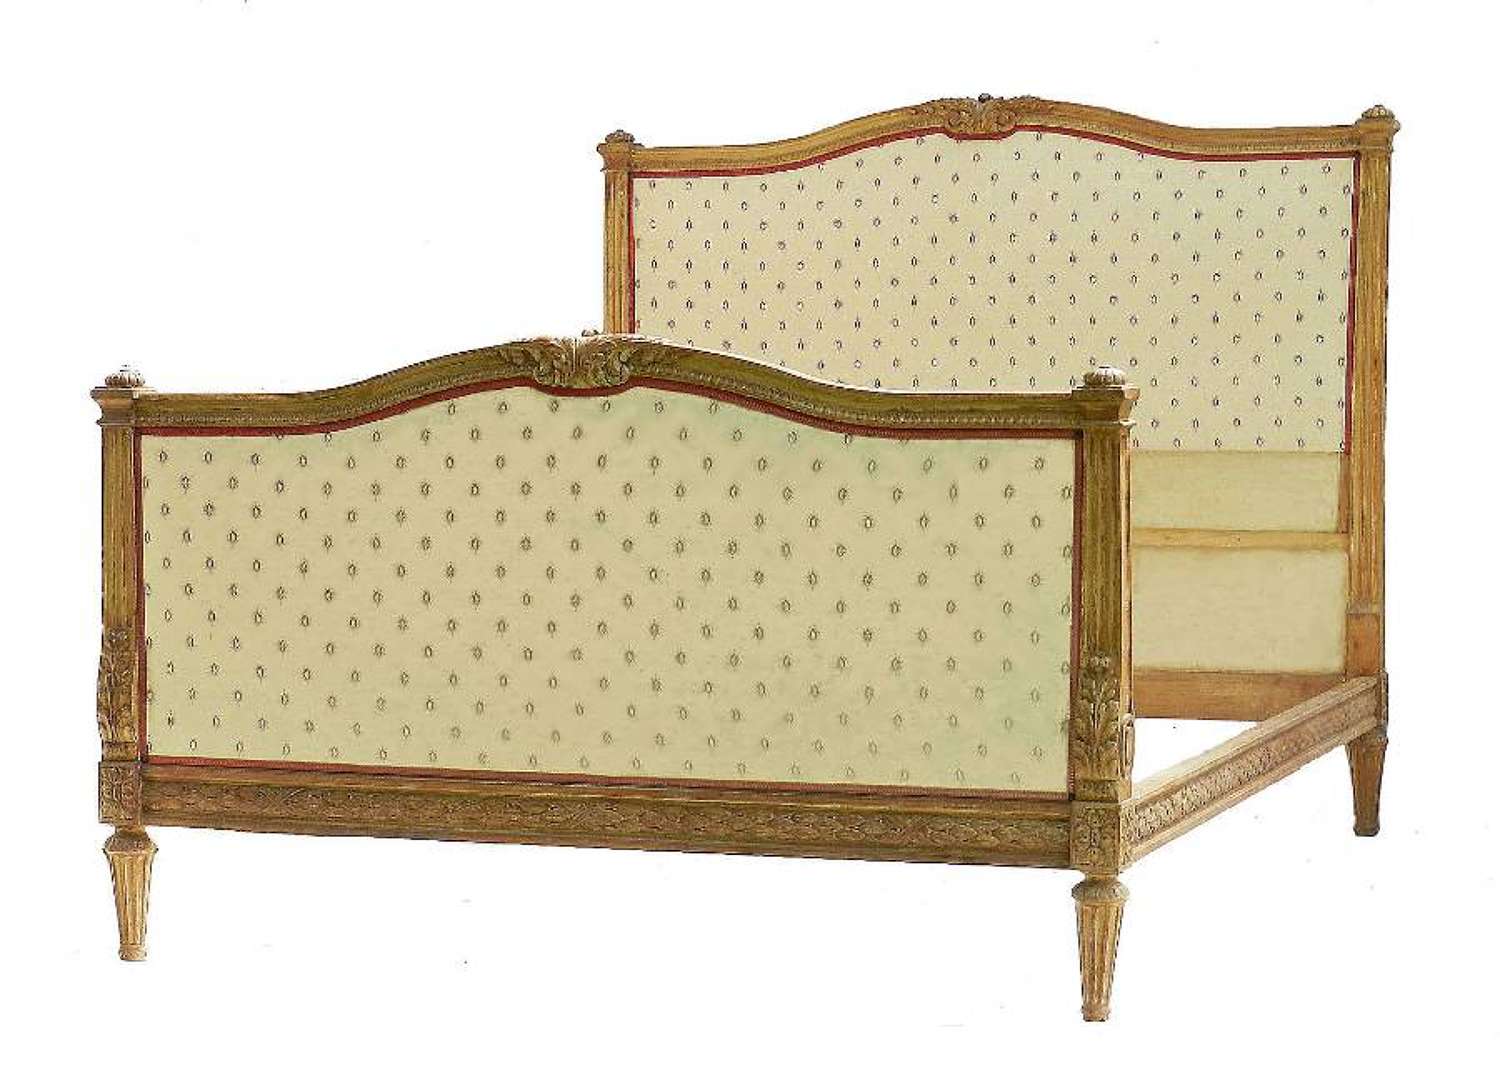 Antique French Bed US Queen UK King-Size 19th Century Louis XVI, circa 1850 